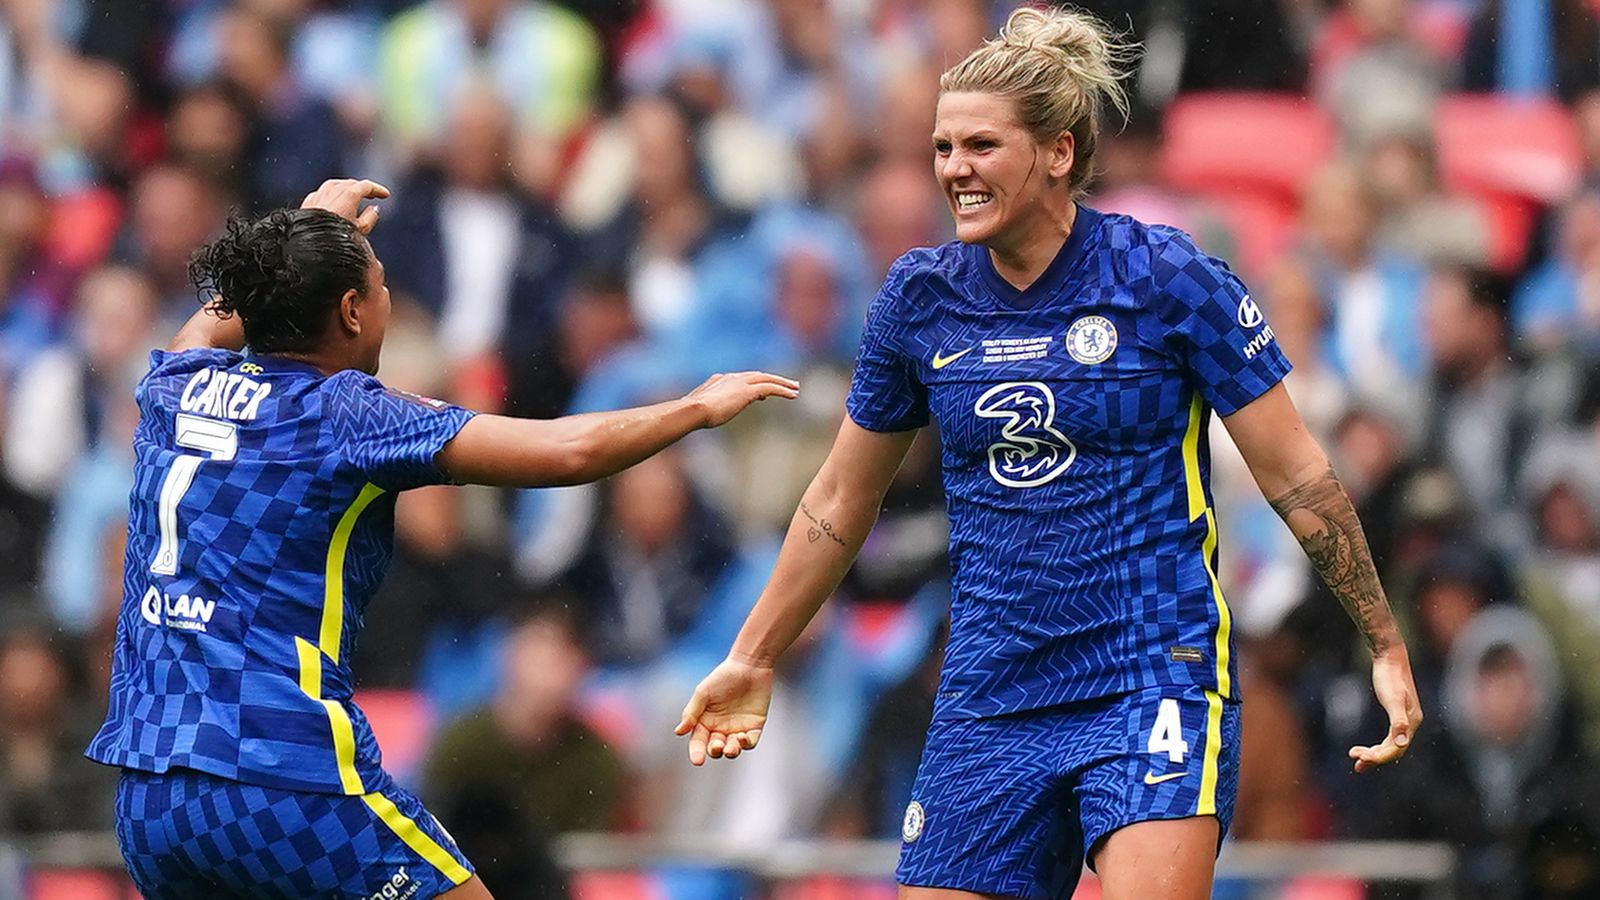 Chelsea Women defender Millie Bright ‘over the moon’ about club’s takeover by Todd Boehly consortium